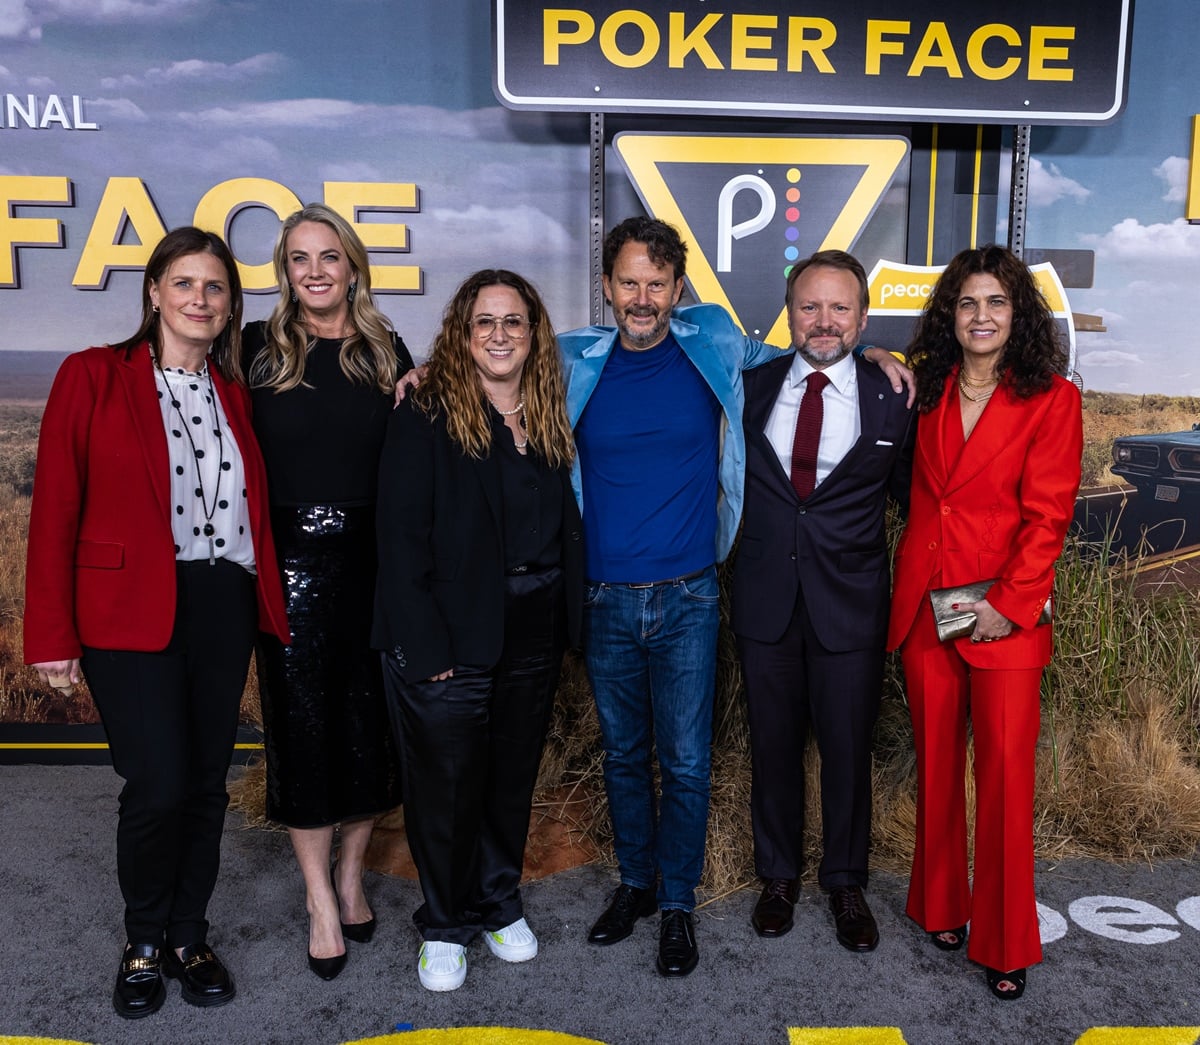 Lisa Katz, President of Scripted Content at NBCUniversal, Kelly Campbell, President of Peacock, Susan Rovner, Chairman, Entertainment Content, NBCUniversal, Rian Johnson, Ram Bergman, and Nena Rodrigue attend the Los Angeles premiere for the Peacock original series "Poker Face"